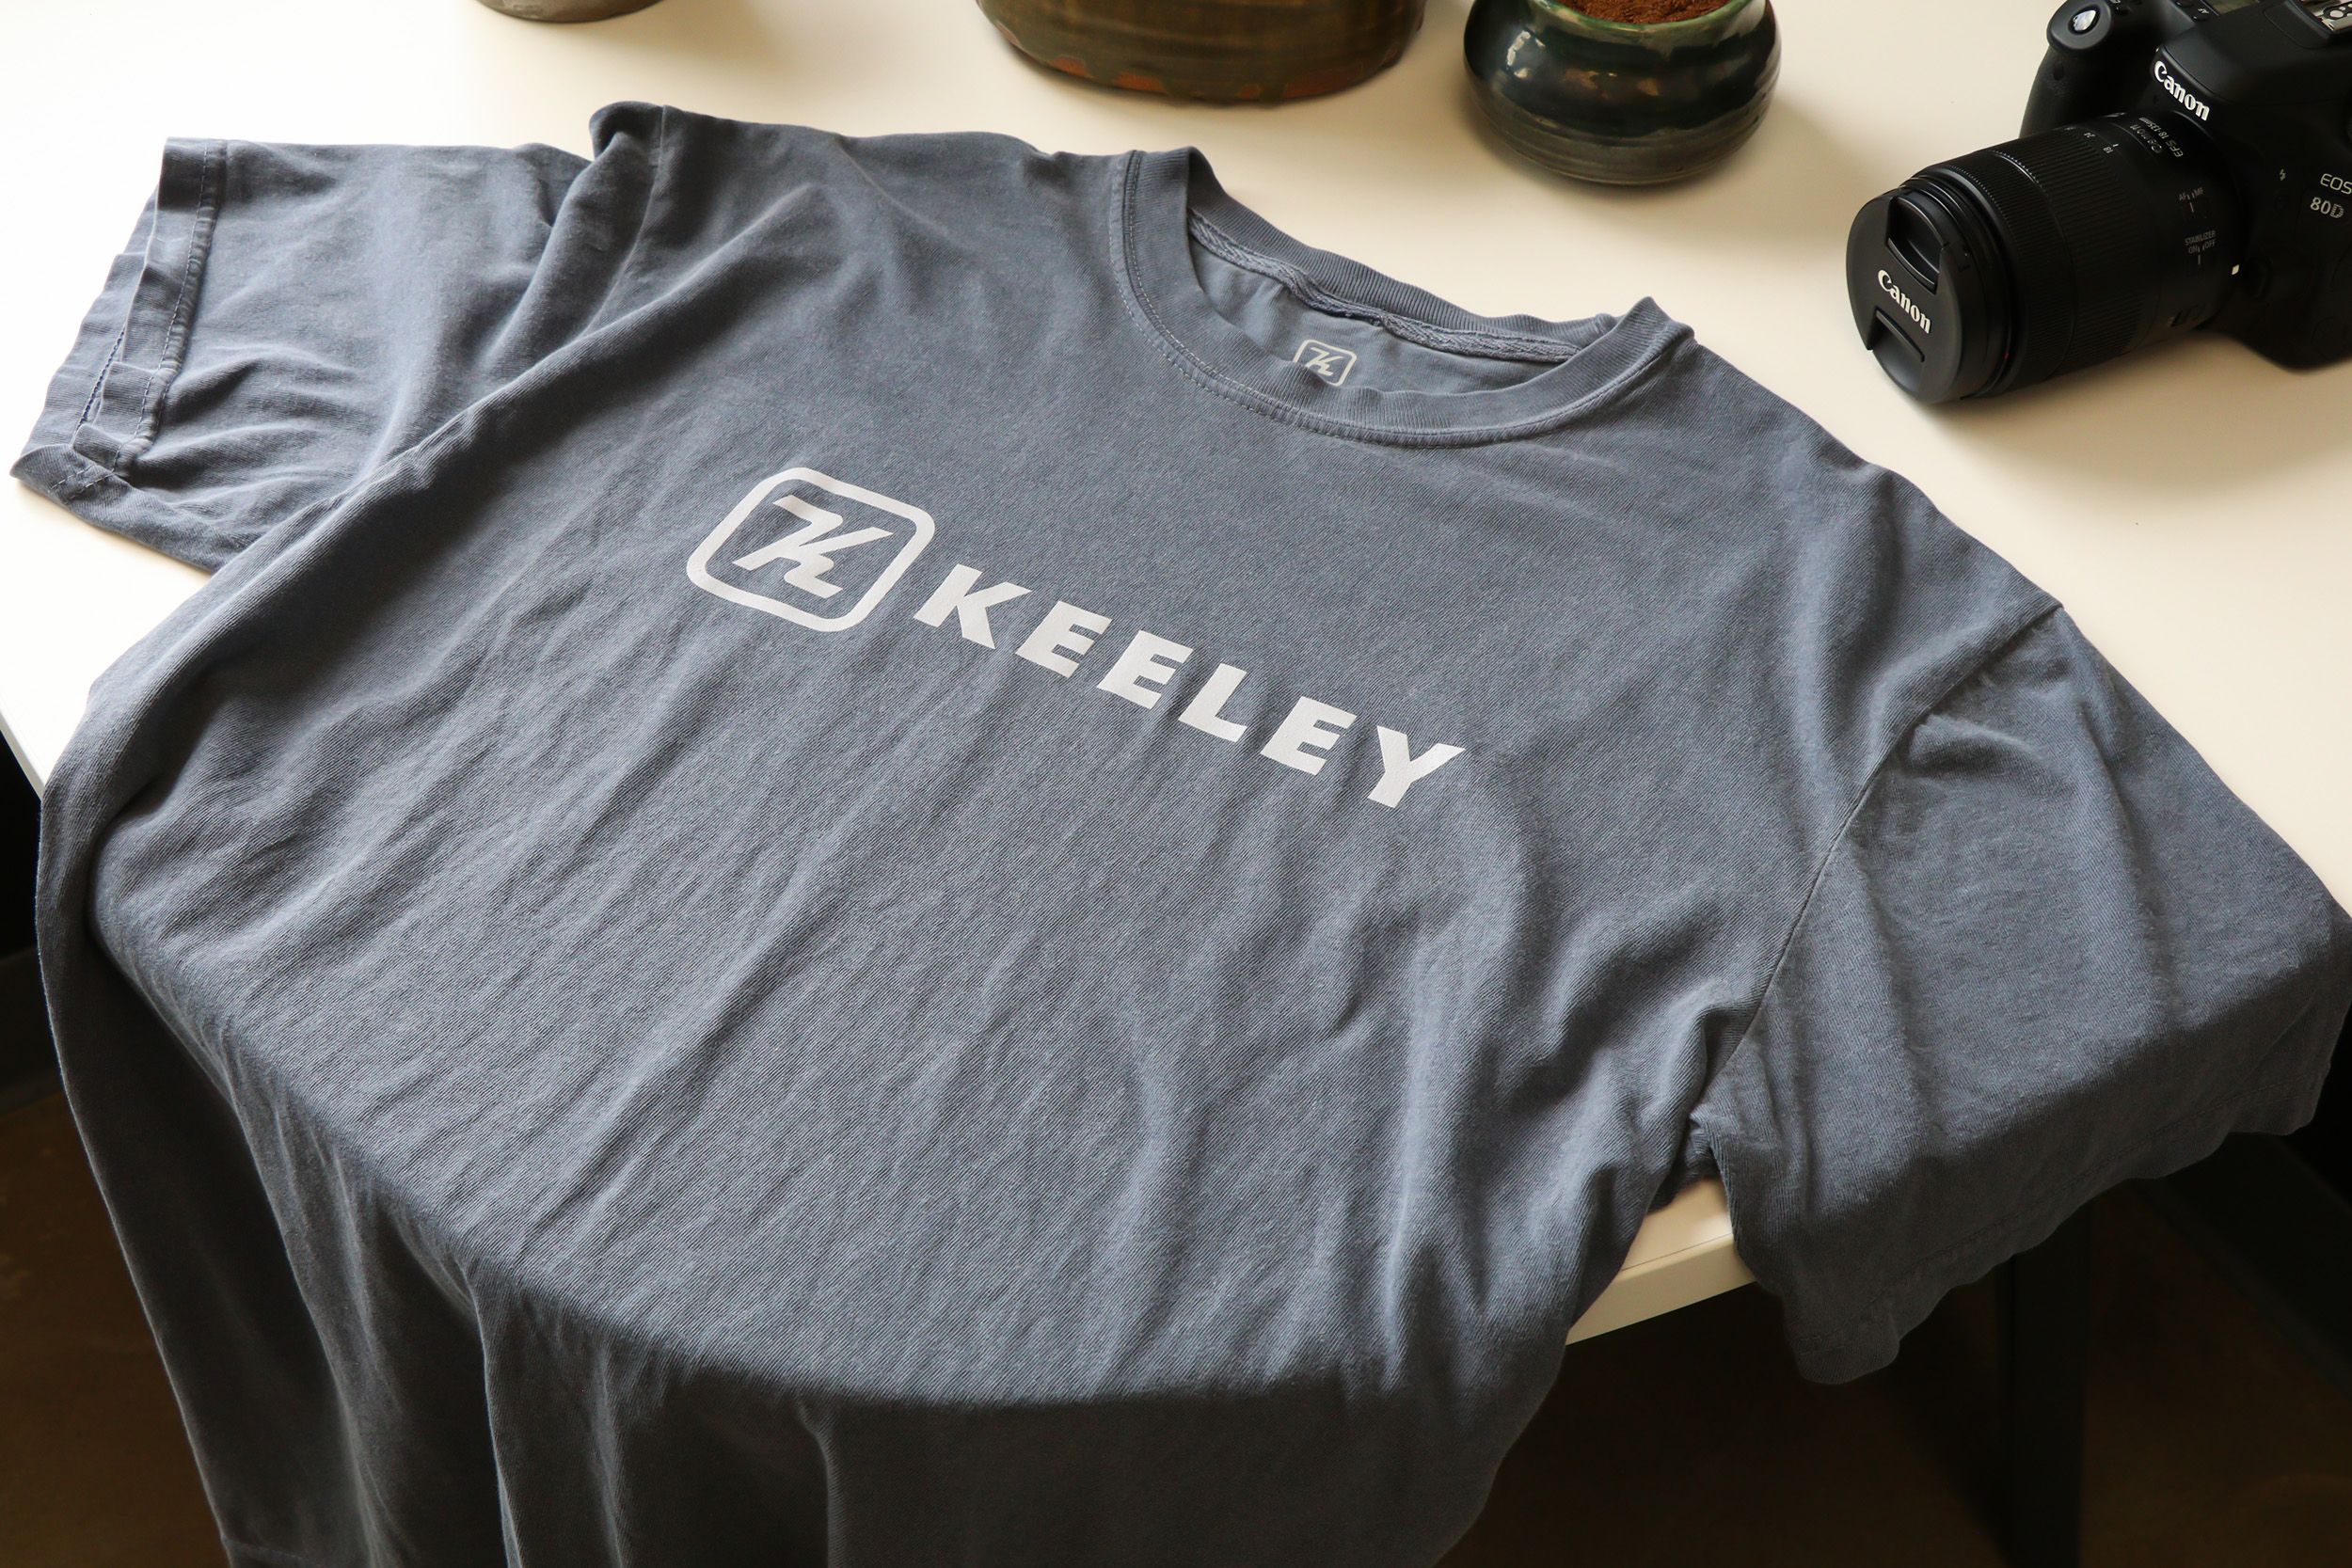 Keeley High and Tight Premium Tee - Front Print